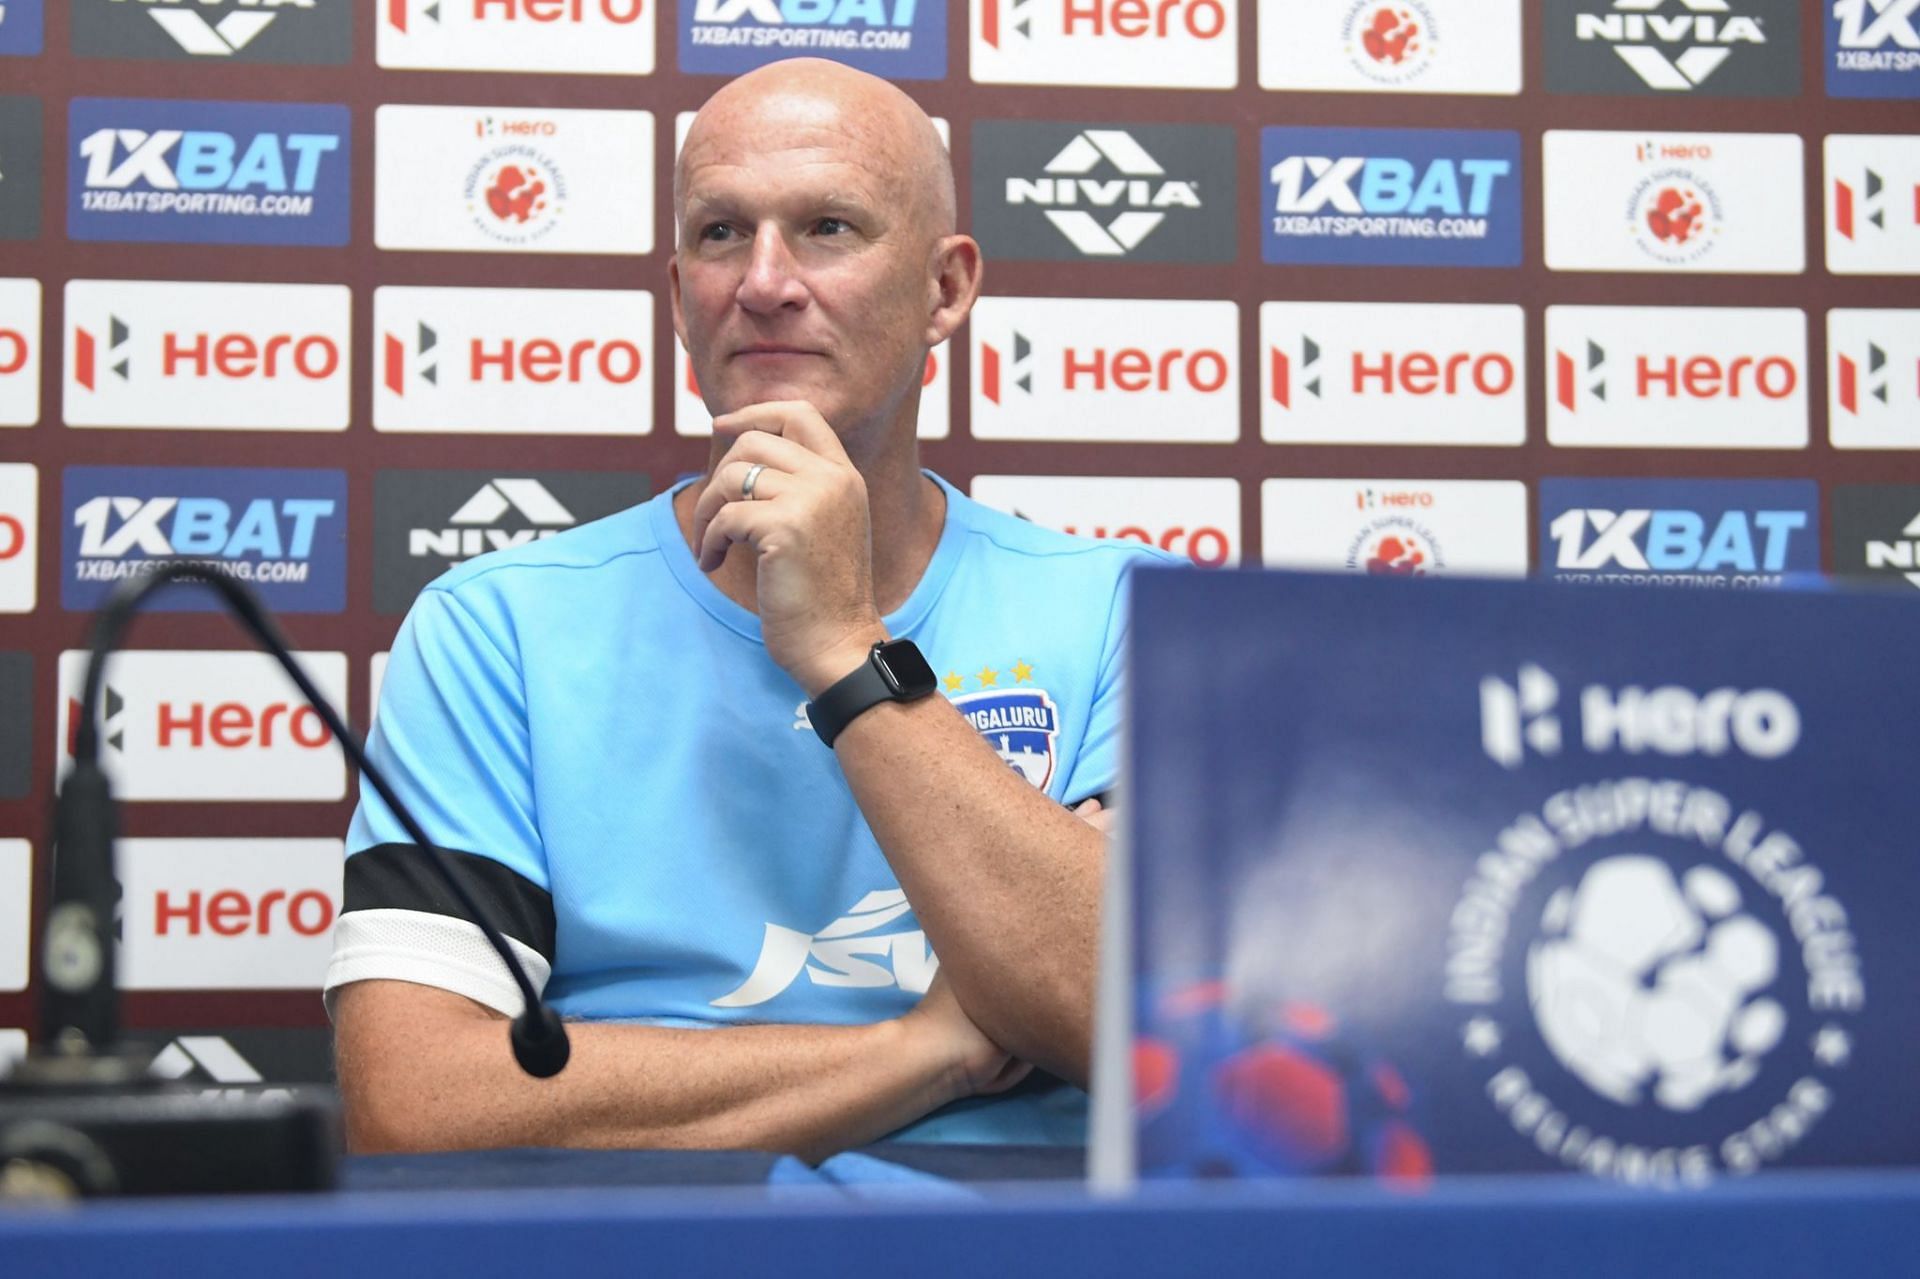 Bengaluru FC manager Simon Grayson wants his team to go out and enjoy the derby against Chennaiyin. (Image: BFC Media)